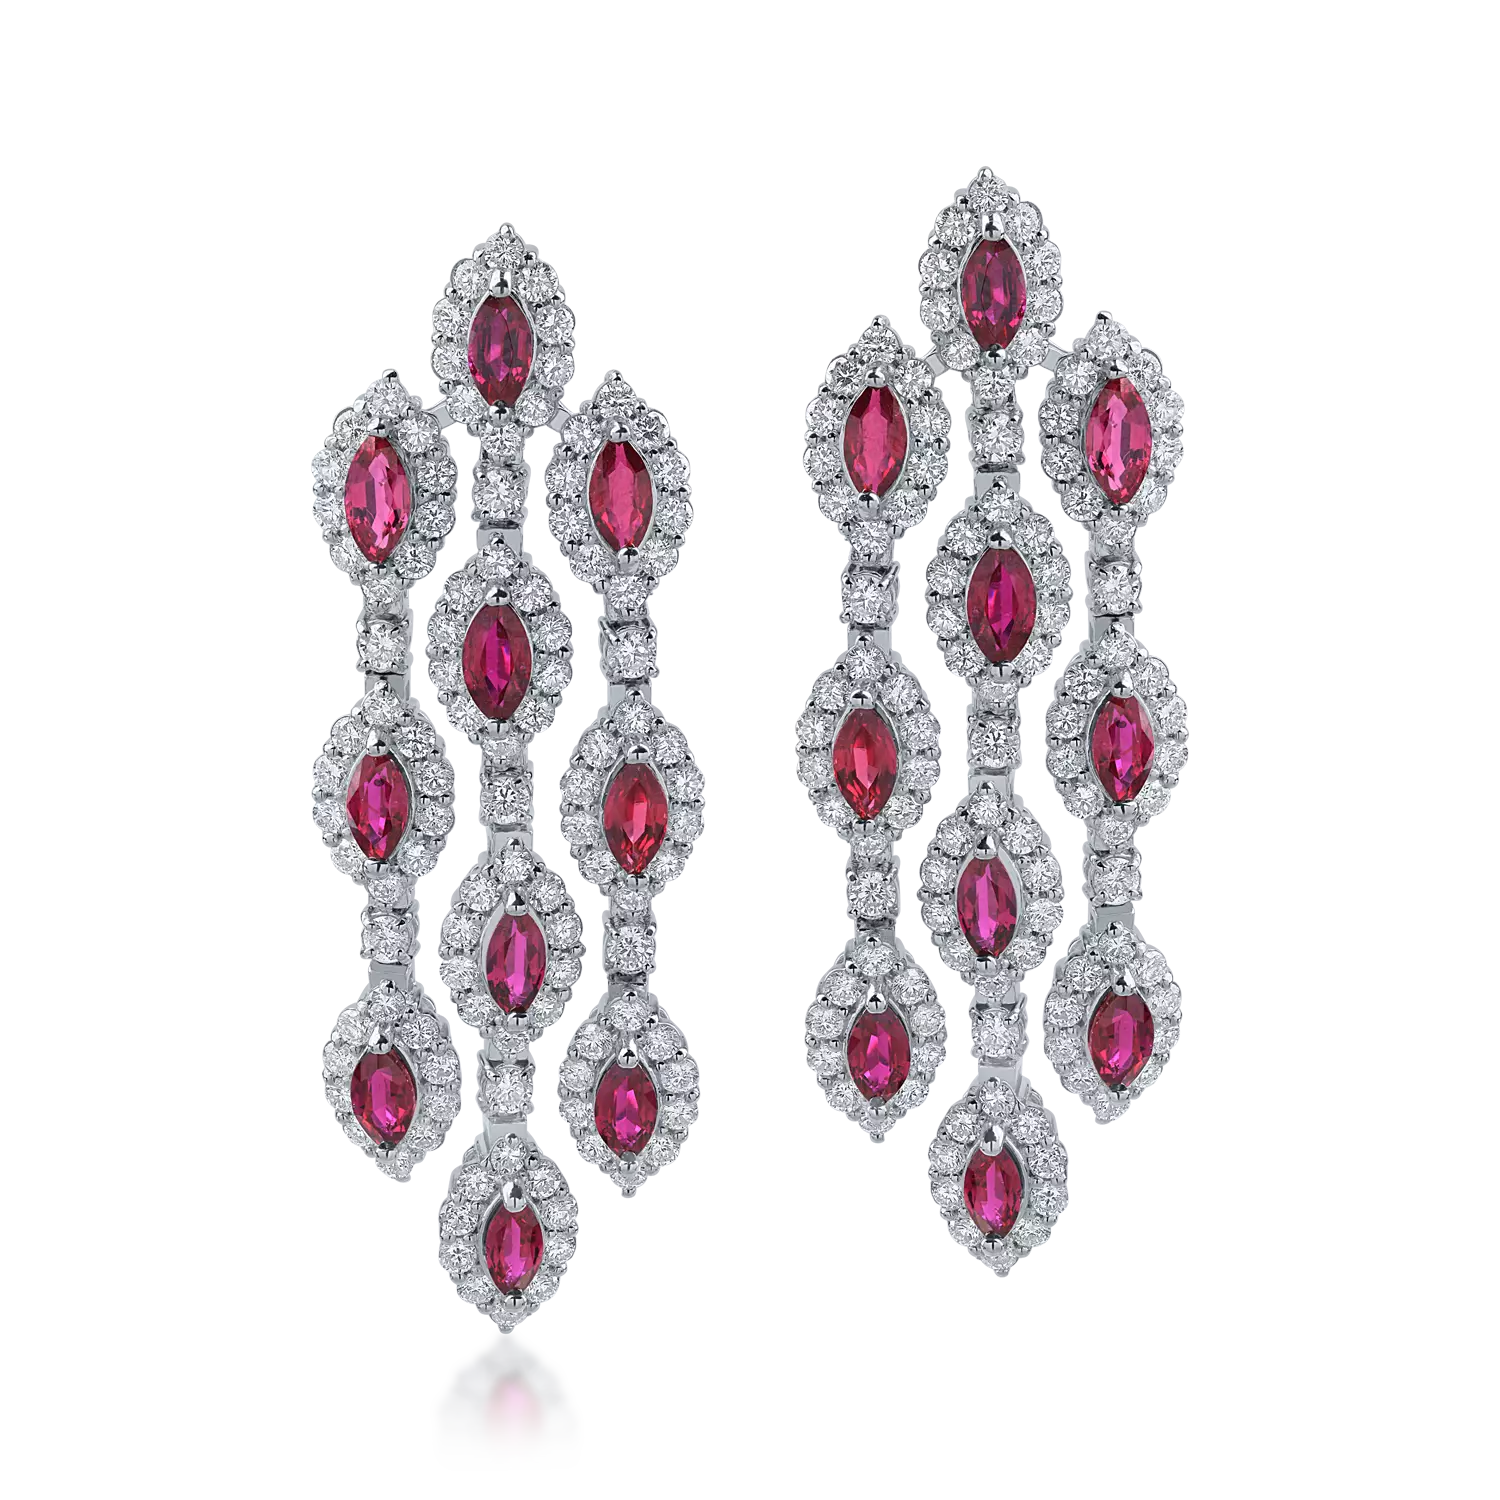 Platinum earrings with 3.27ct rubies and 3.12ct diamonds